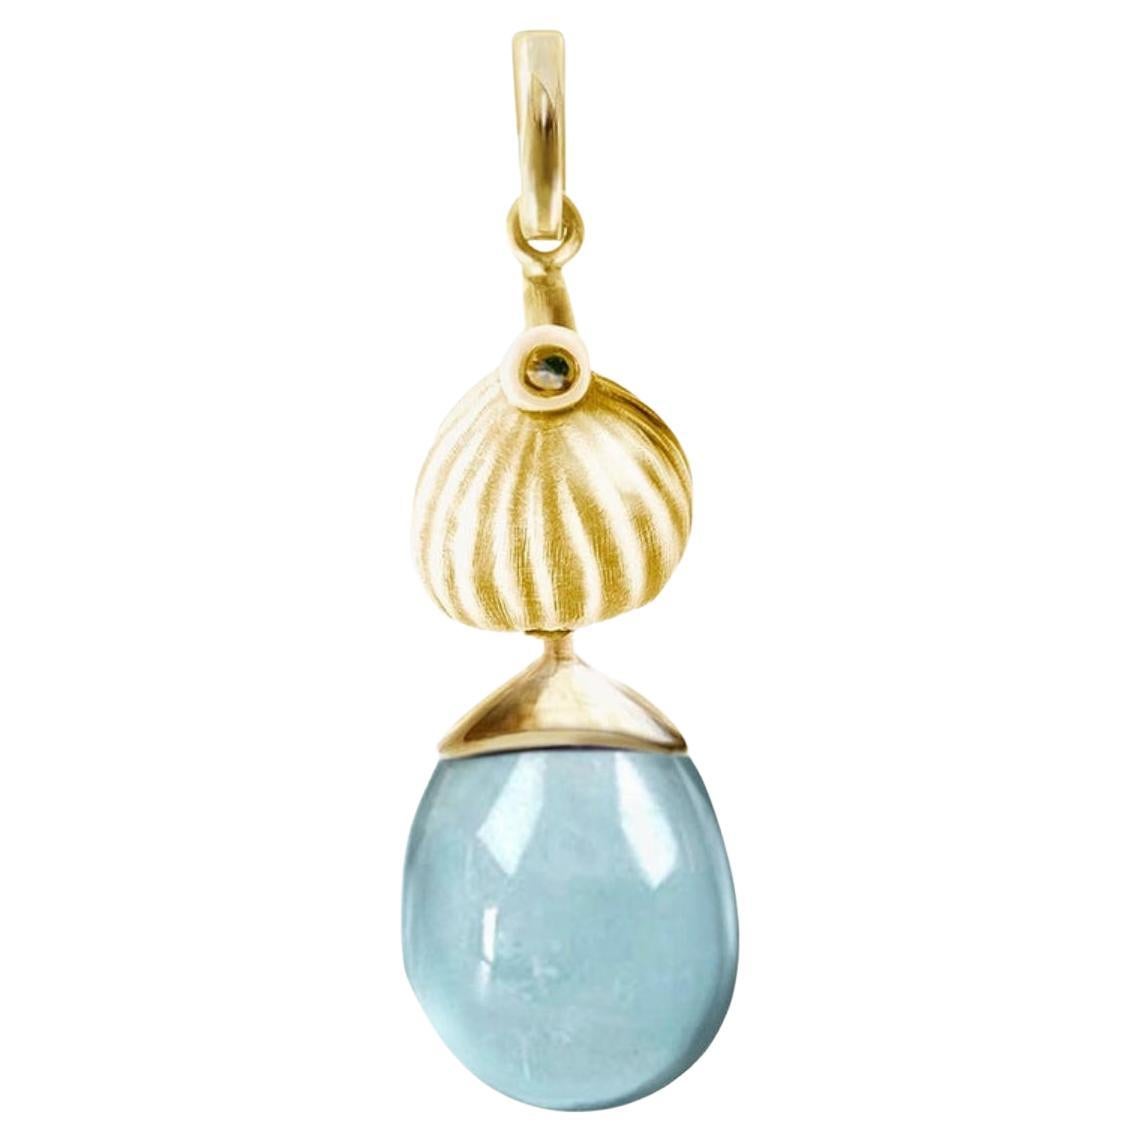 Yellow Gold Drop Pendant Necklace with Blue Topaz by the Artist